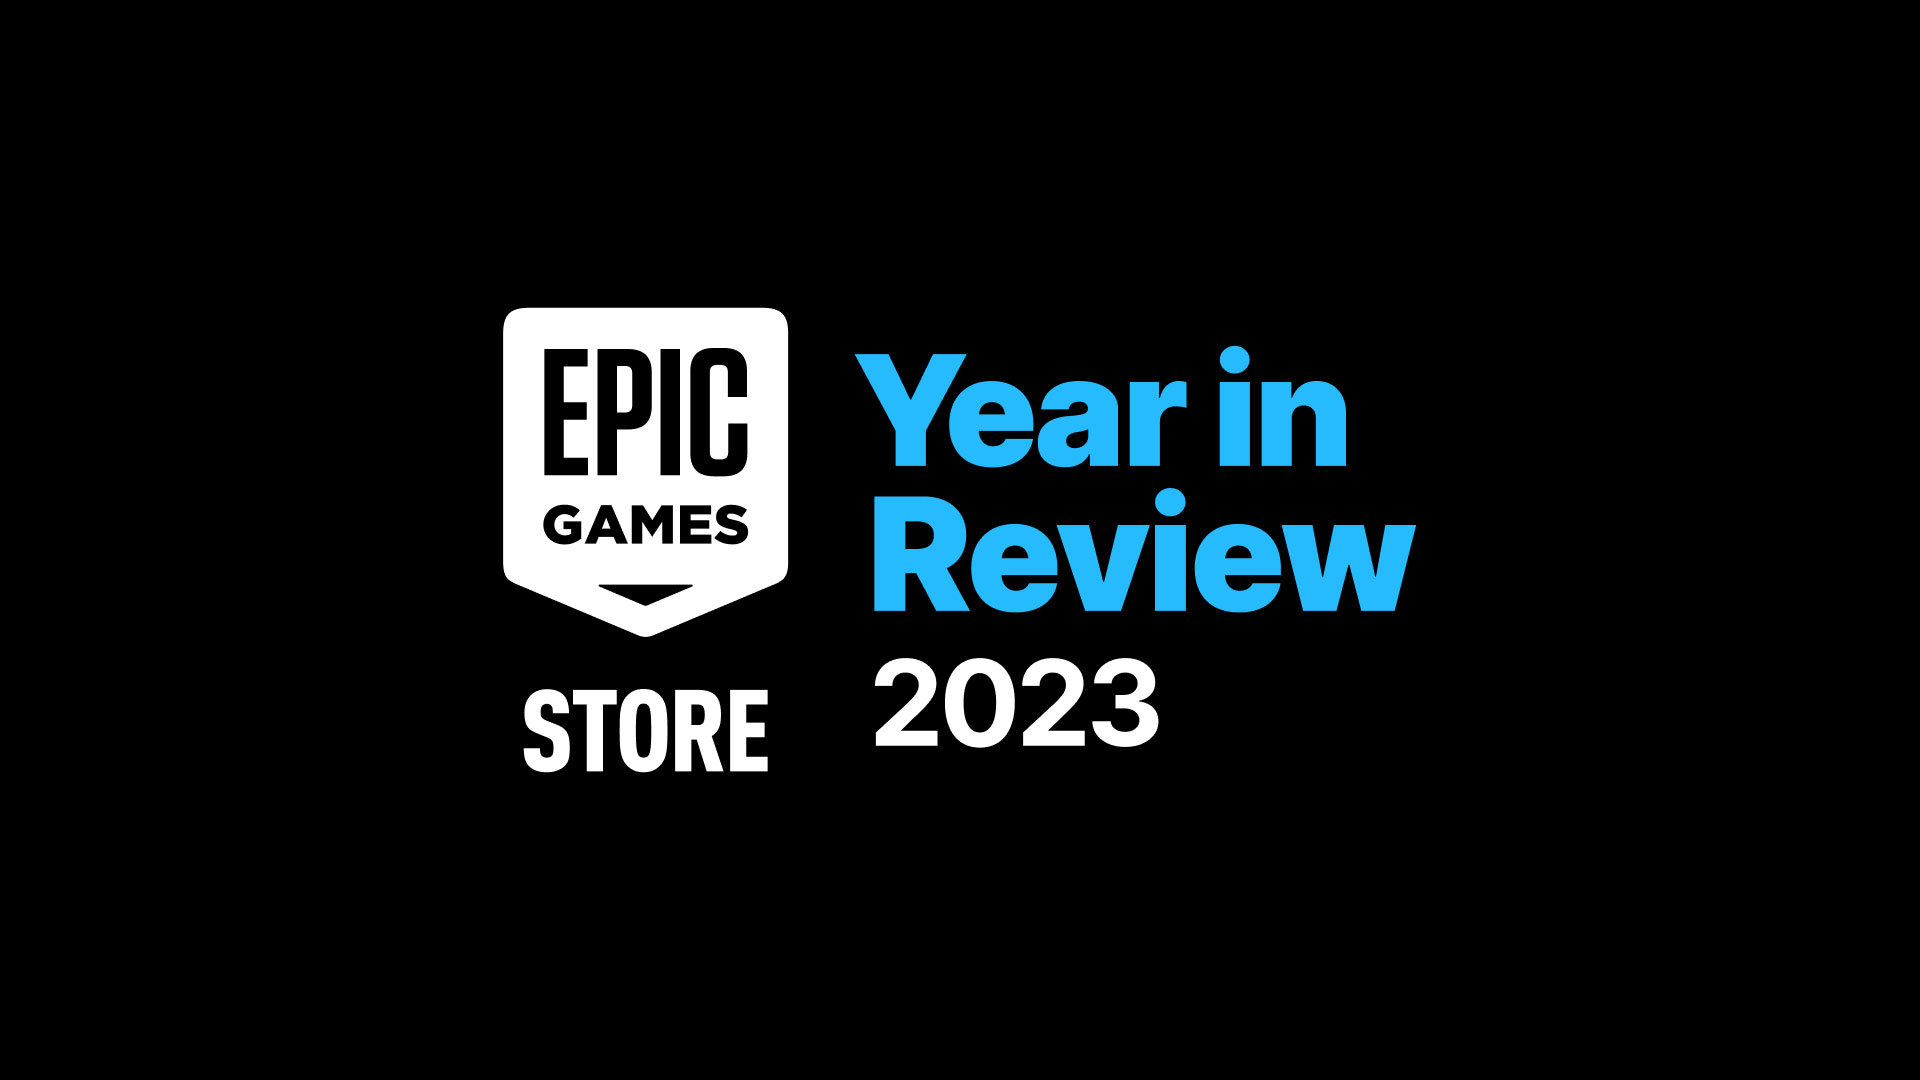 The Epic Games Store has shared some stats from 2023